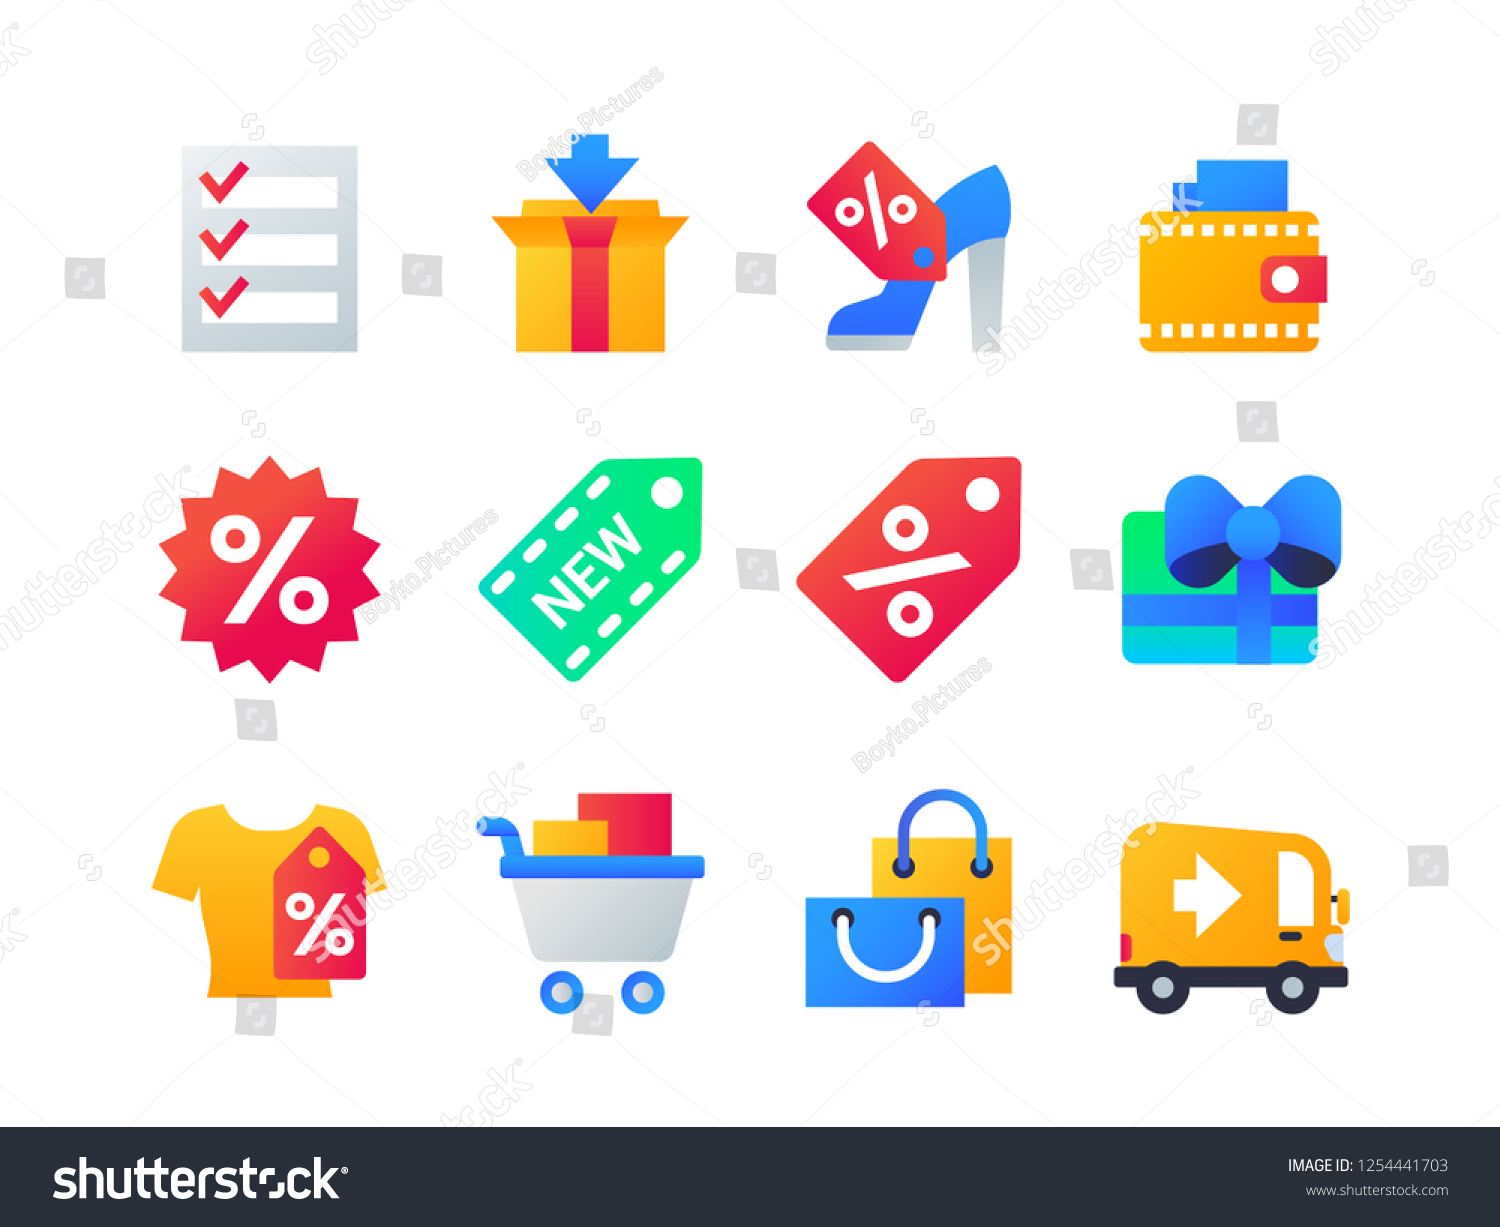 SVG of Shopping - set of flat design style icons on white background. High quality bright web elements, images of check list, sale, new and discount labels, cart, delivery, truck, present, bags, box, wallet svg